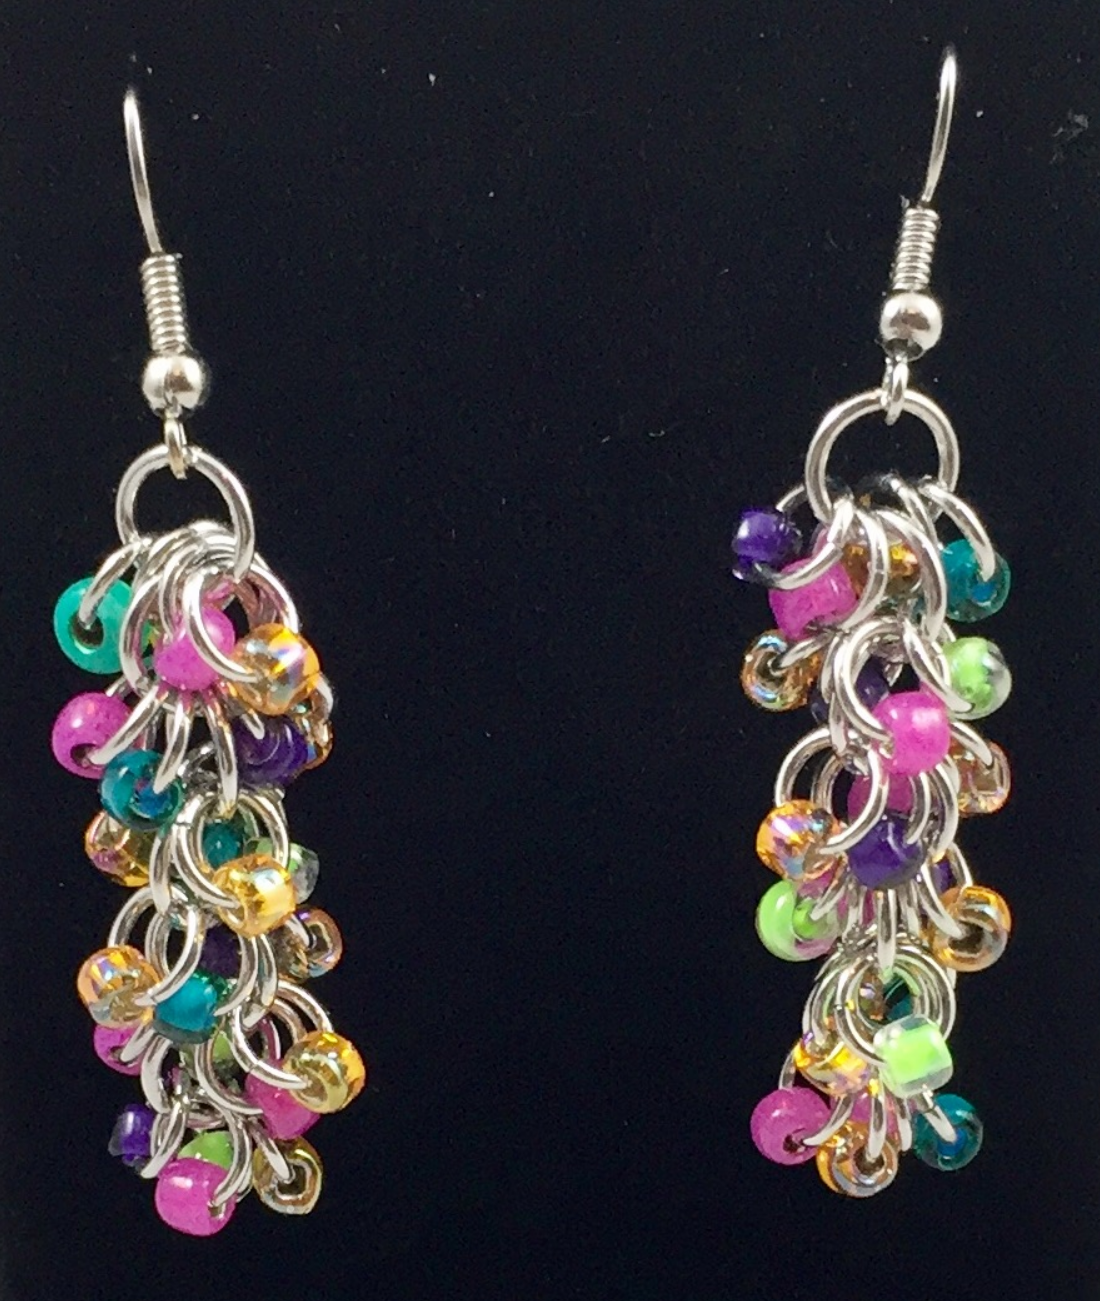 Shaggy Loop earrings with multicolored seed beads